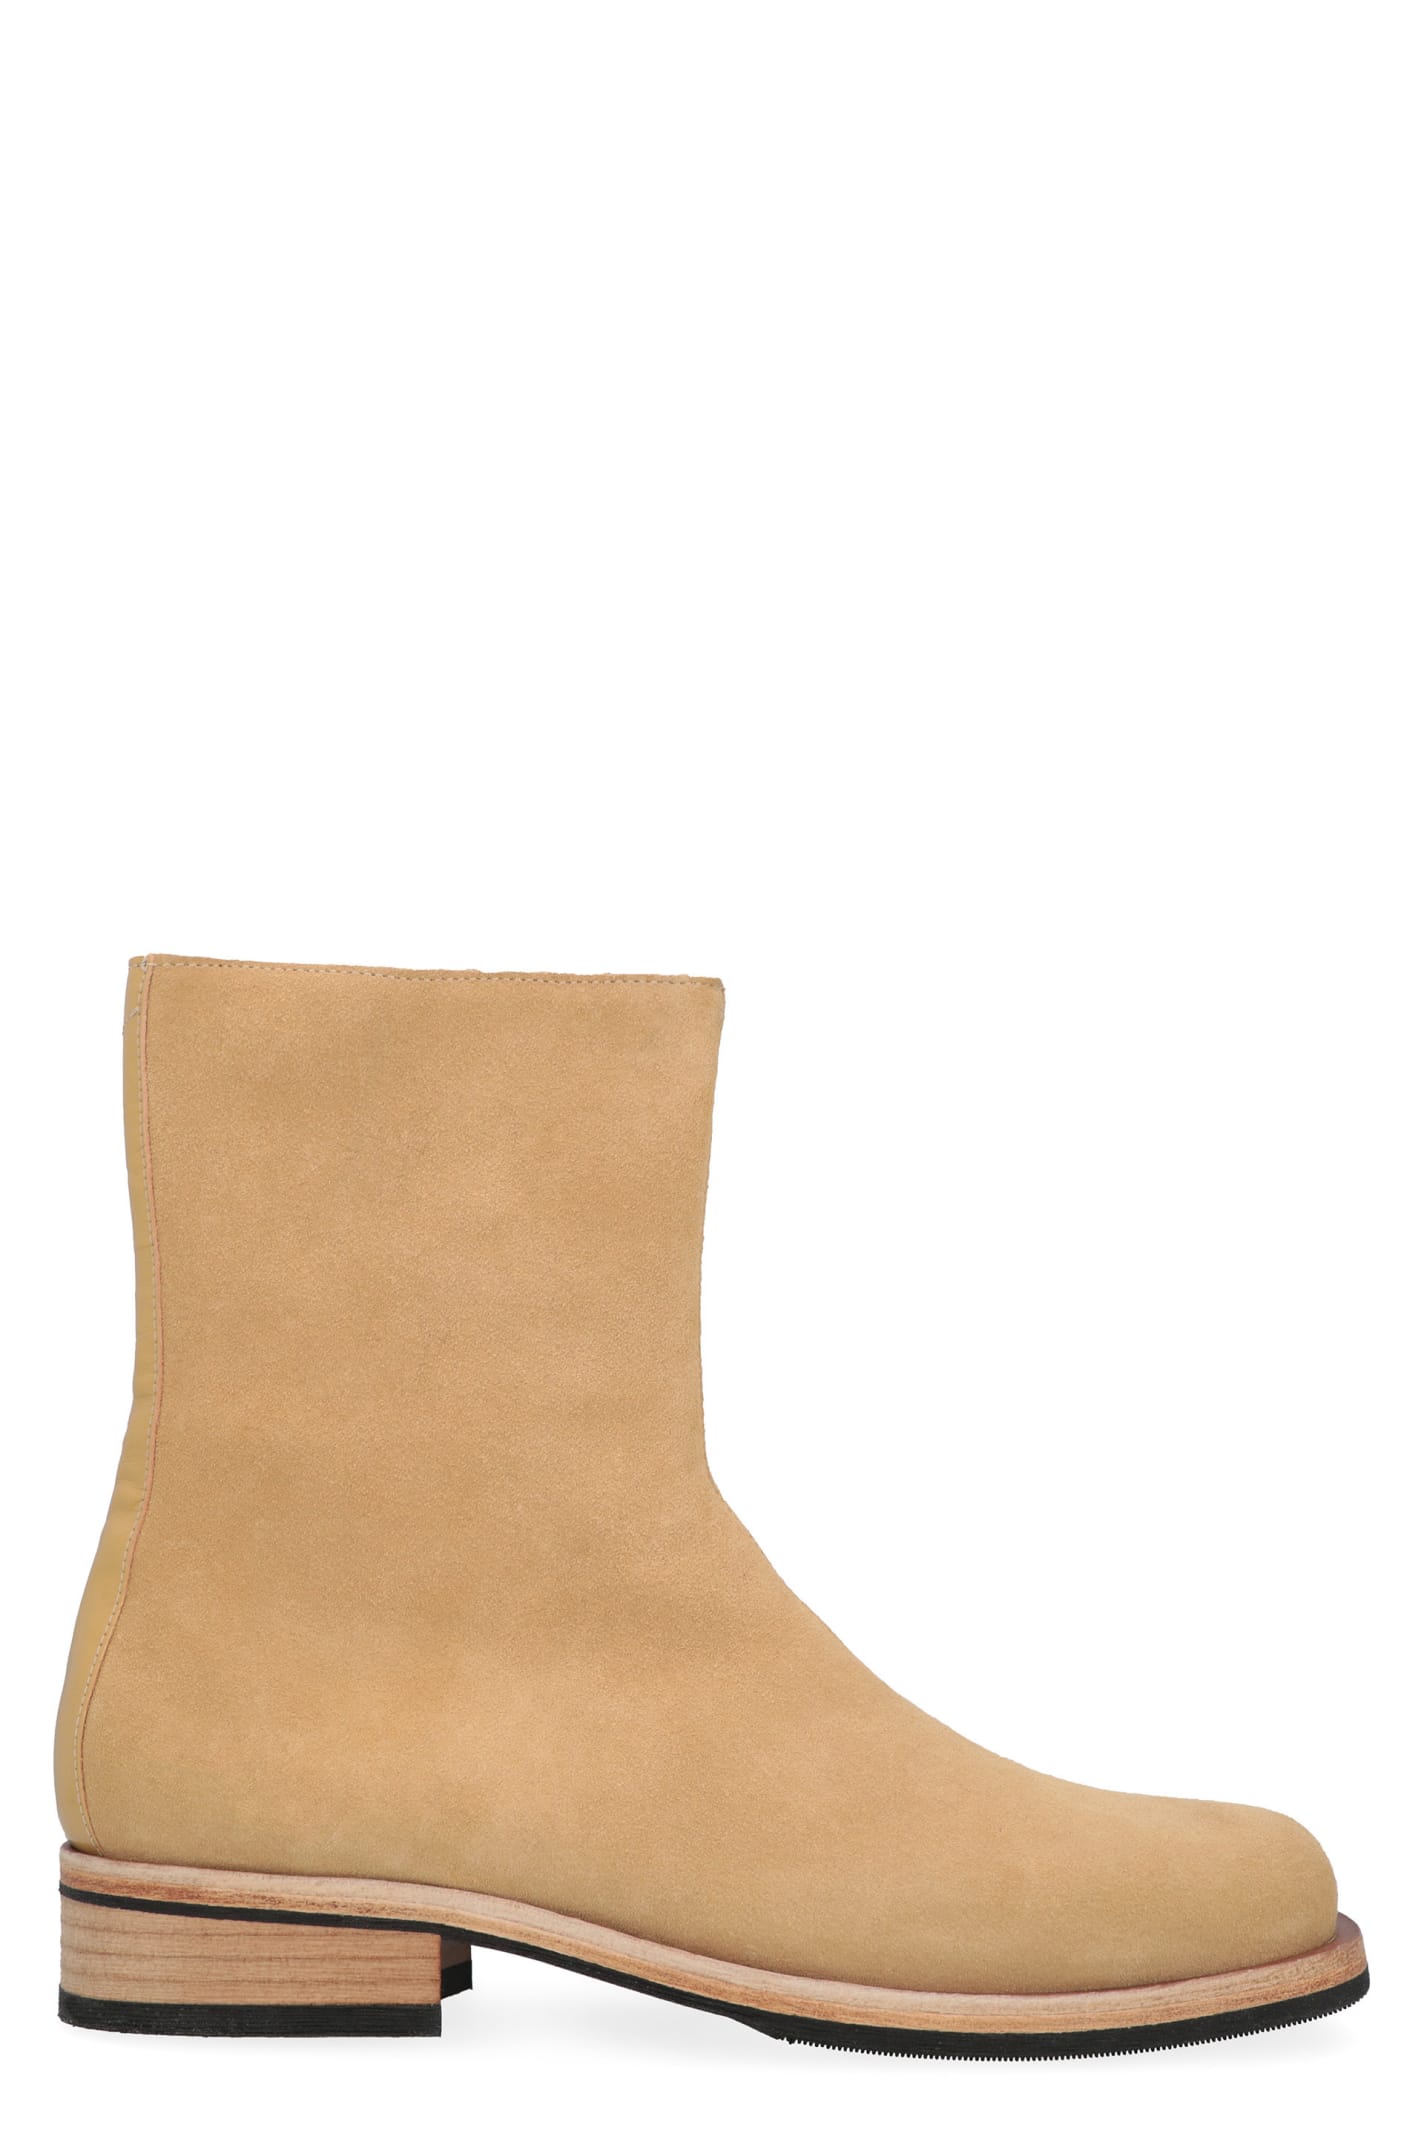 Our Legacy Suede Ankle Boots